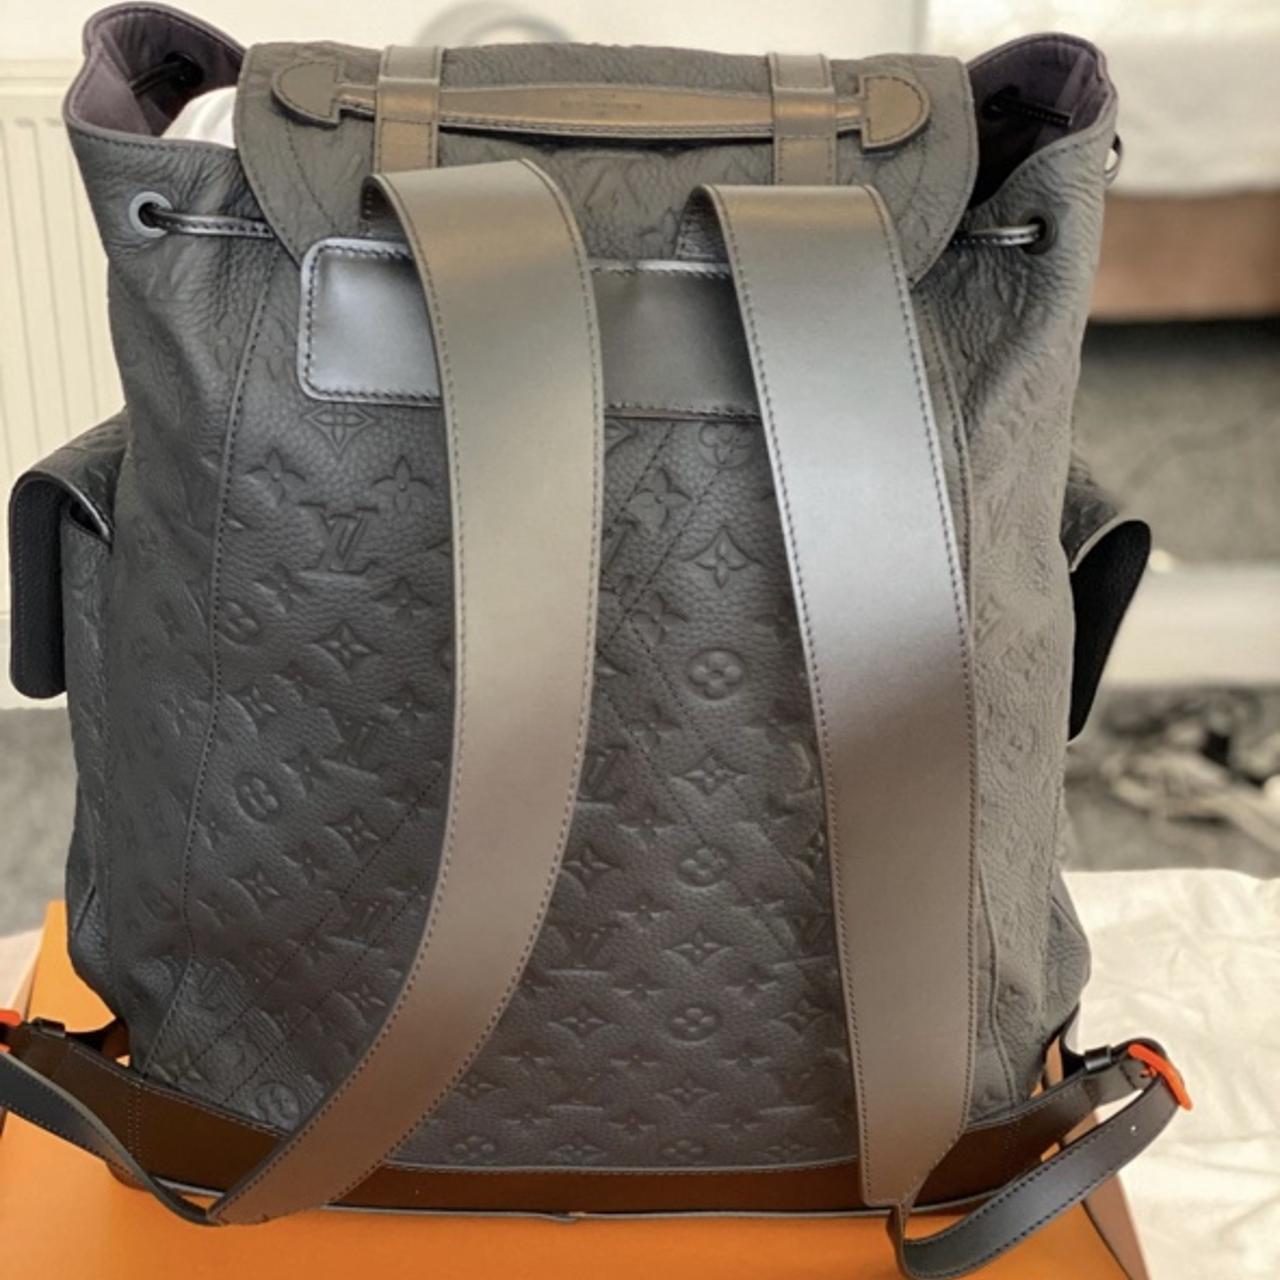 Limited Edition Louis Vuitton x Virgil Abloh Backpack Multipocket DRIP